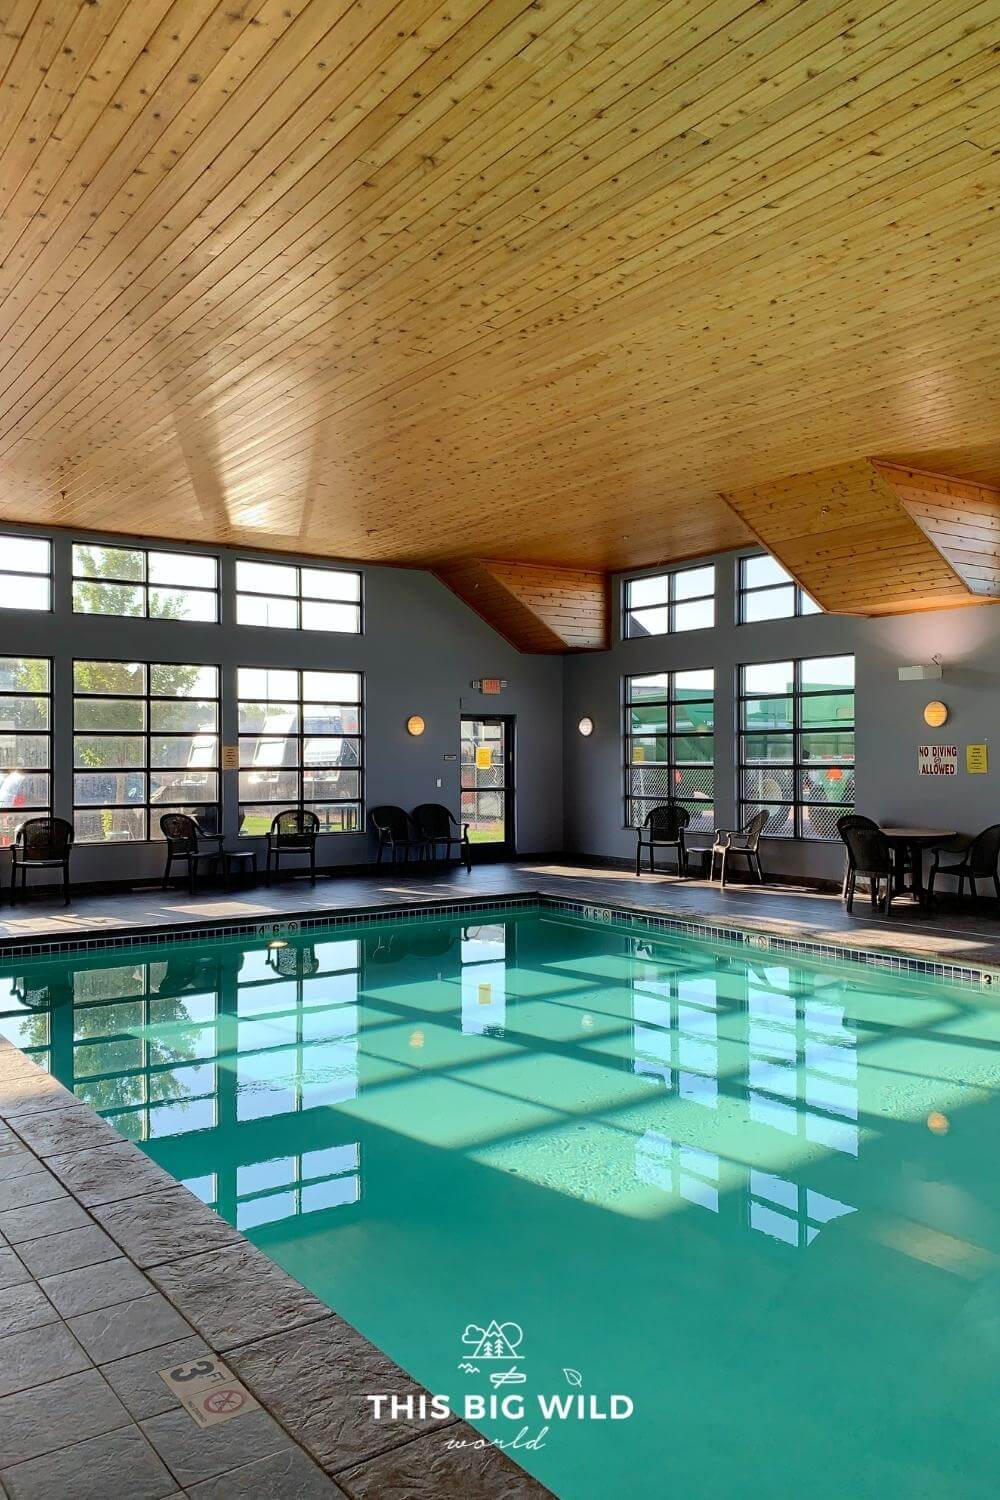 Indoor heated pool with lots of natural light and a wood ceiling.